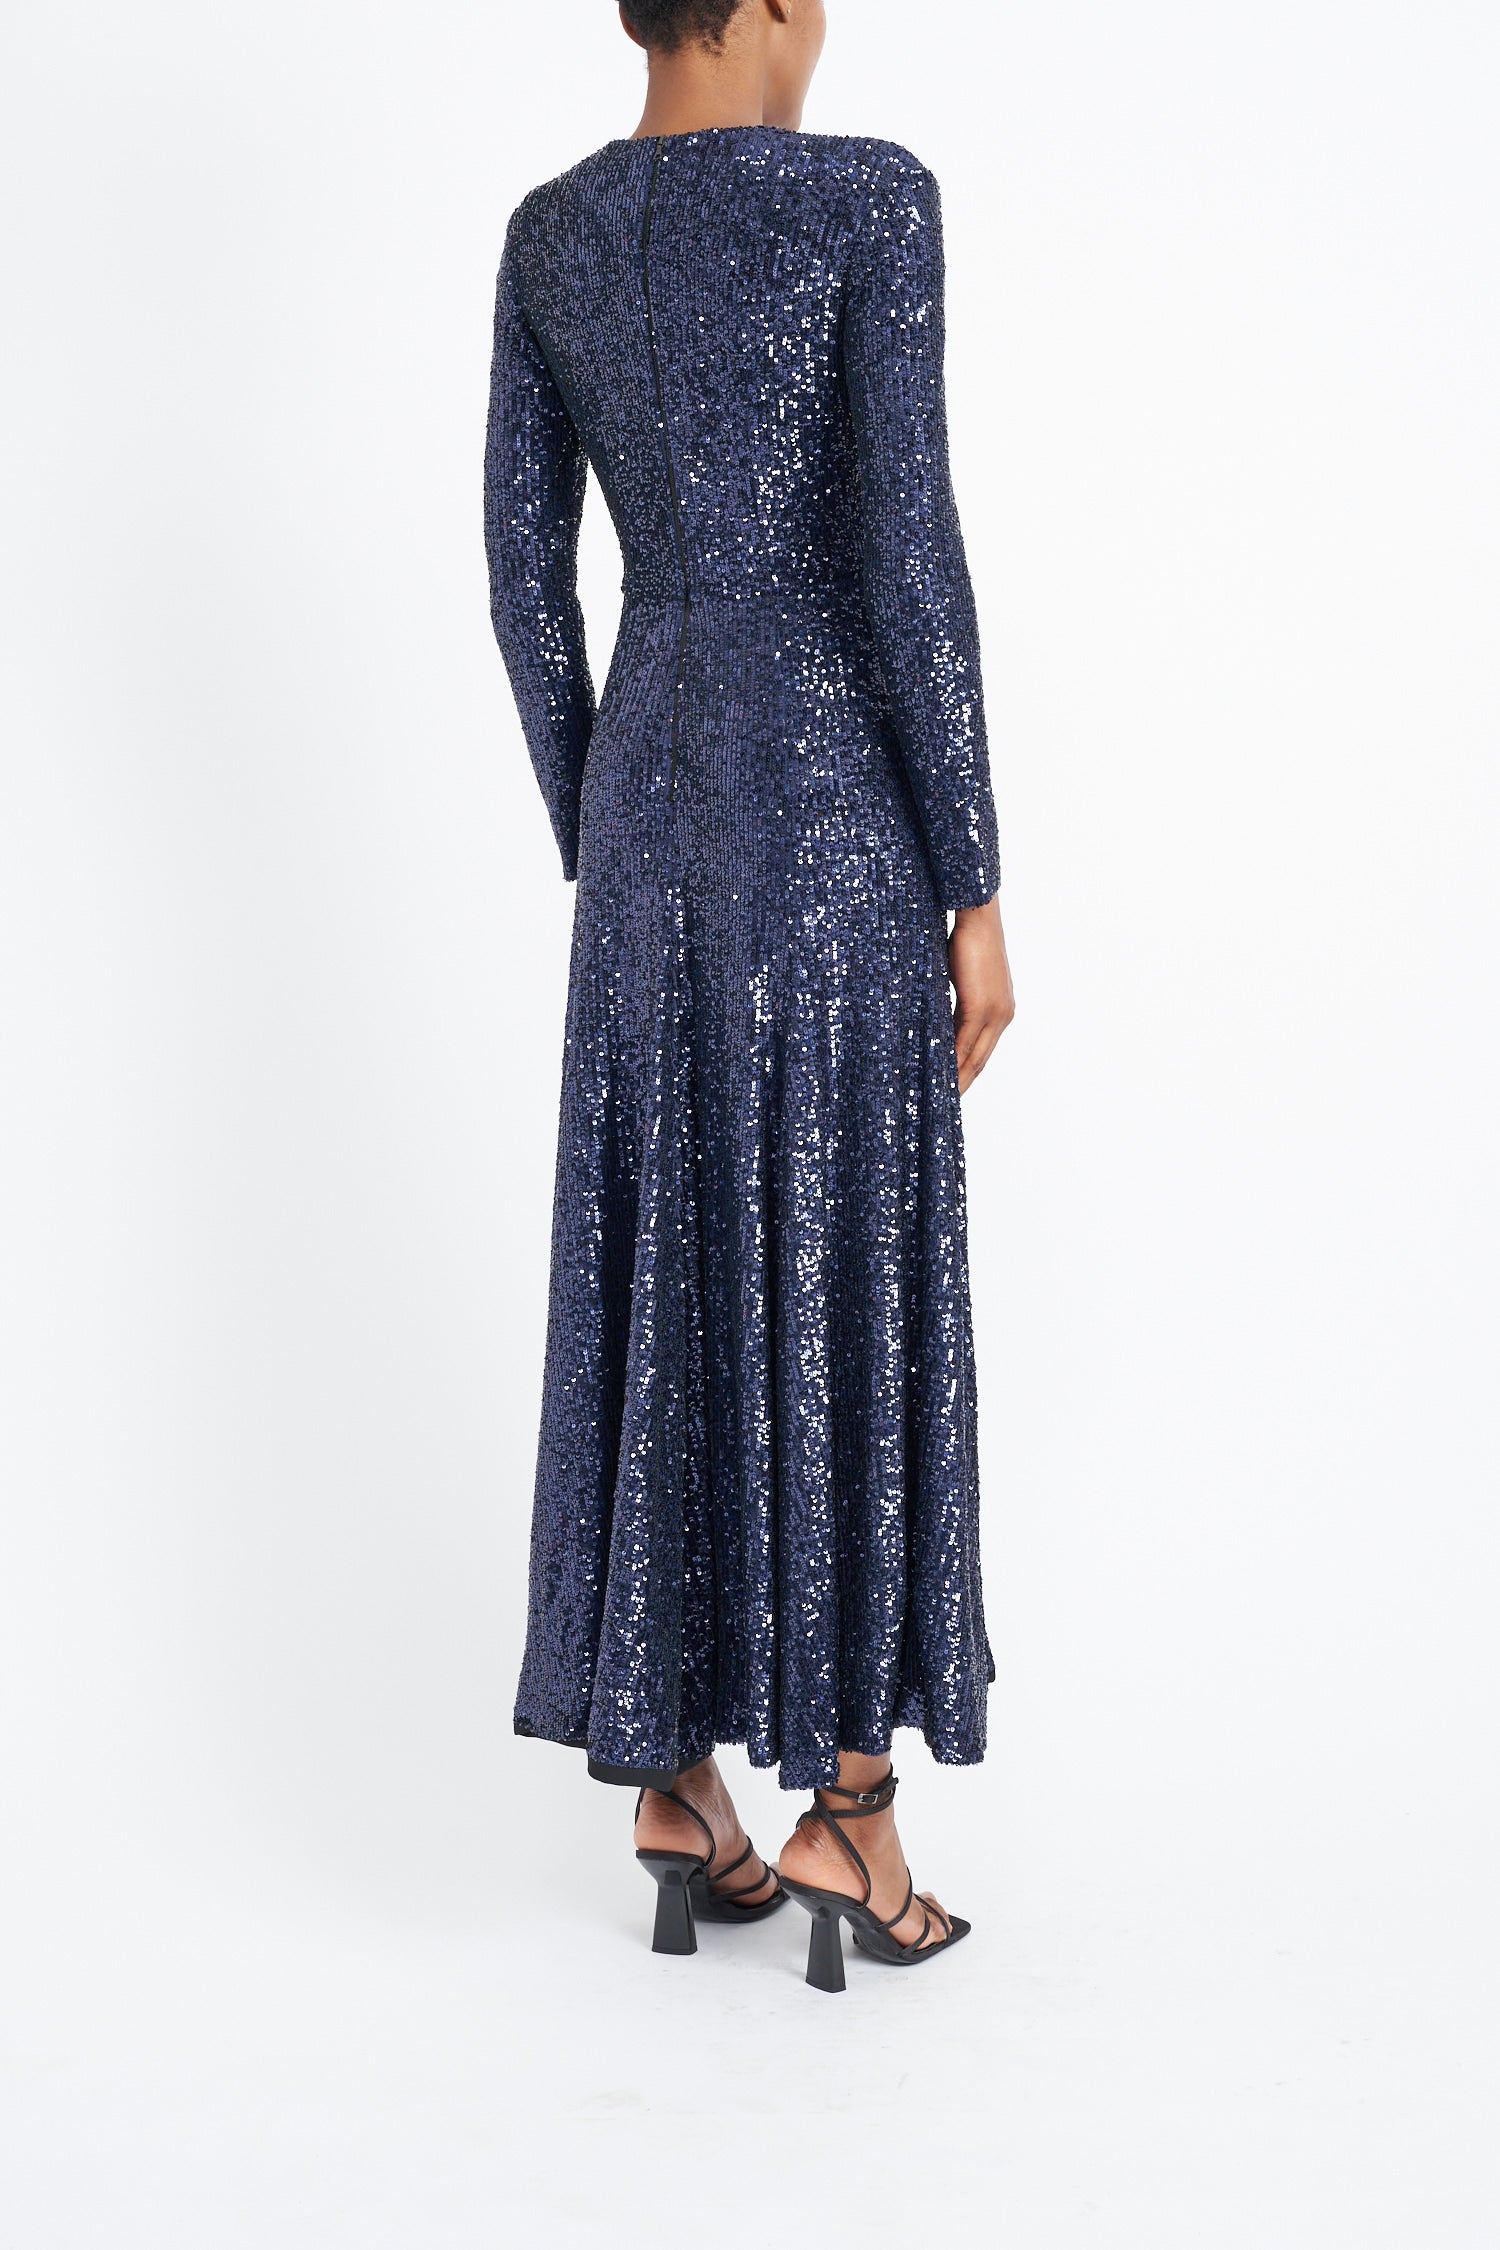 MAYA SUSTAINABLY SOURCED NAVY SEQUIN DRESS